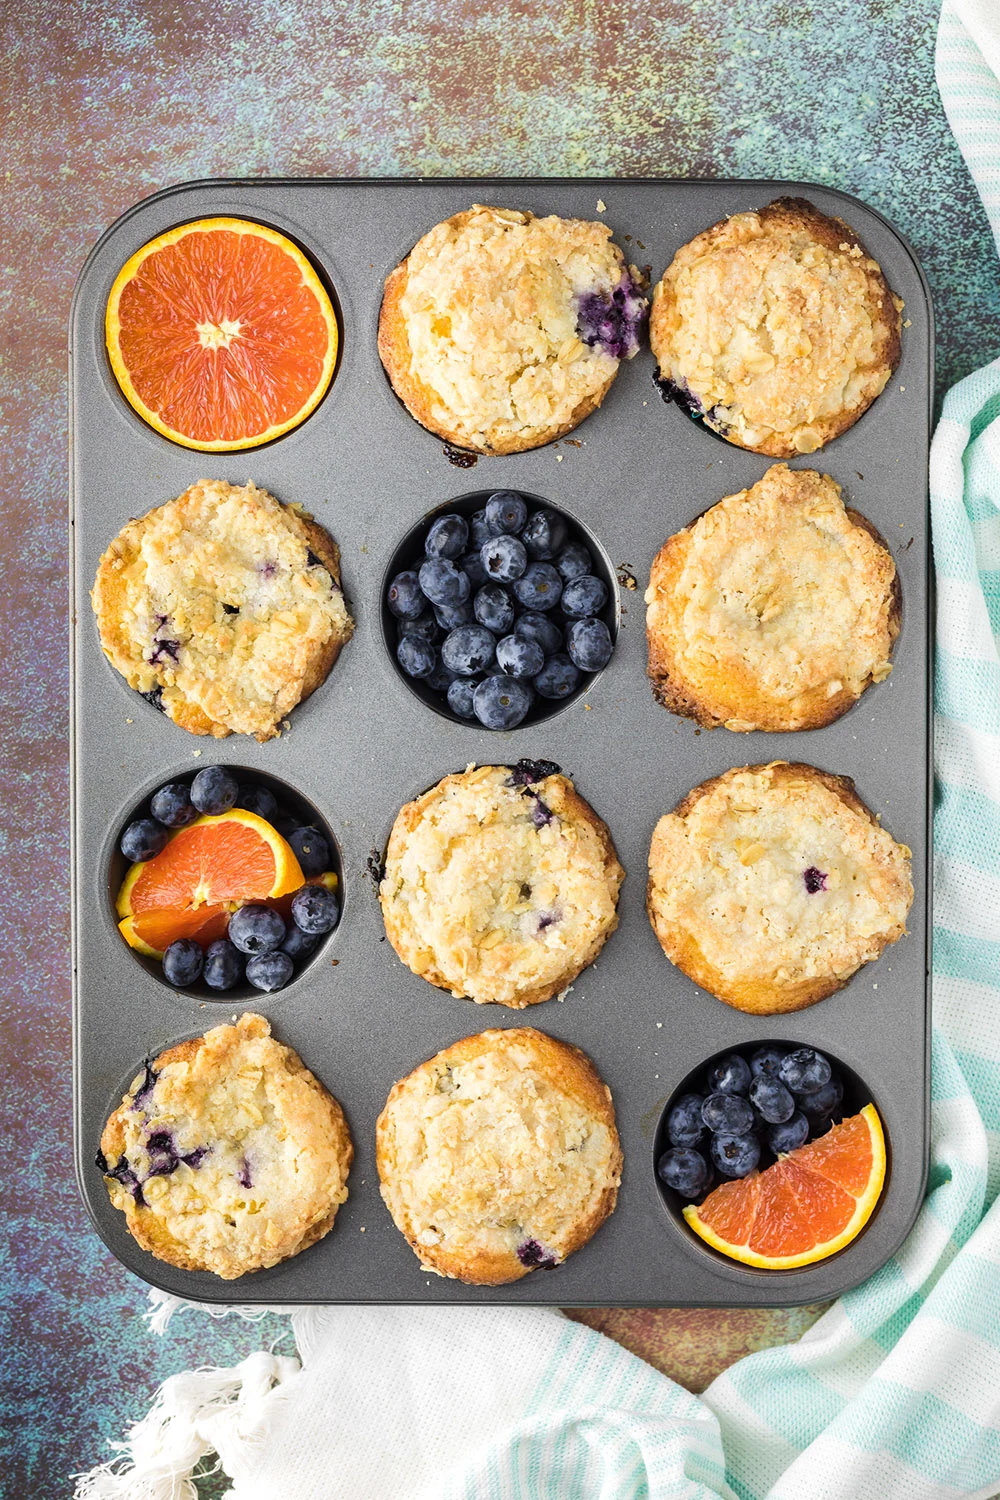 Muffin tin with muffins, oranges, and blueberries in it.